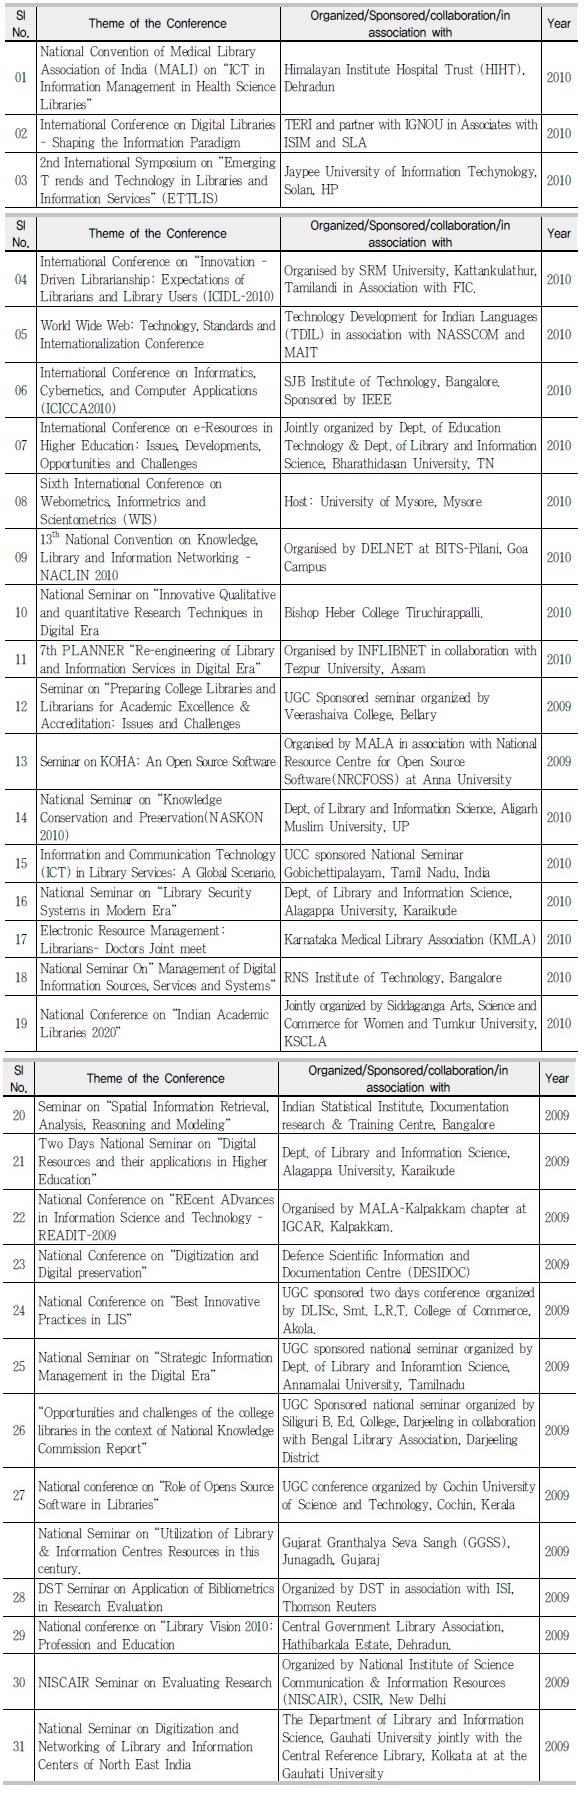 List of Conferences/Seminars/Symposium Organized by other LIS Associations SpecializedAgencies Universities and LIS Departments in India since last 2 years